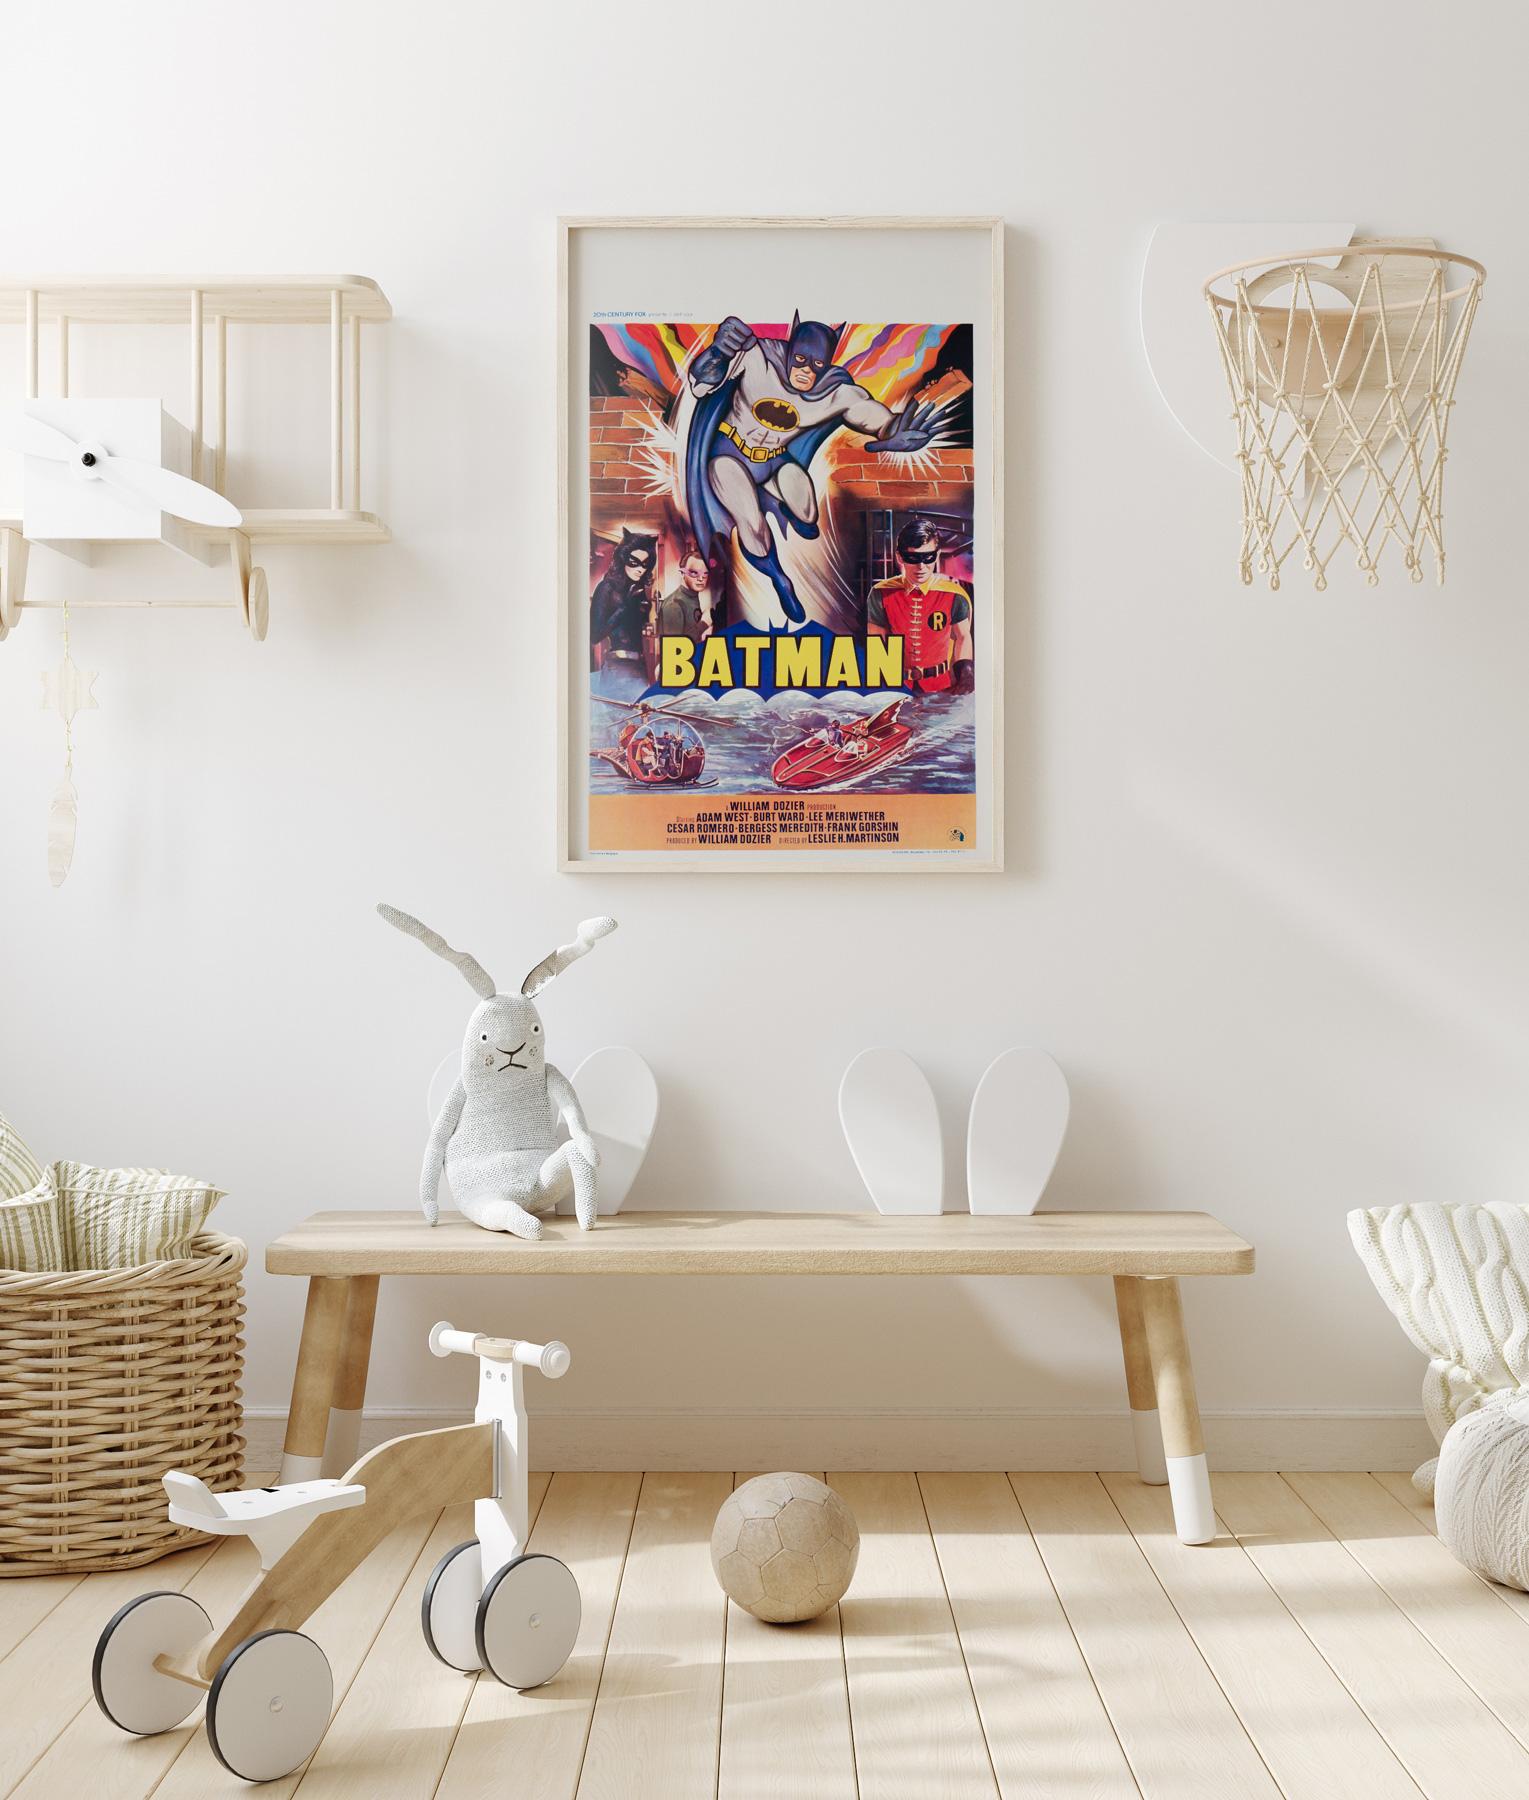 Striking early 1970s re-release Belgian film poster for Batman. Superb artwork.

This original vintage movie poster has been professionally linen-backed is sized 14 3/8 x 21 1/8 inches (plus a little more with the linen). It will be sent rolled